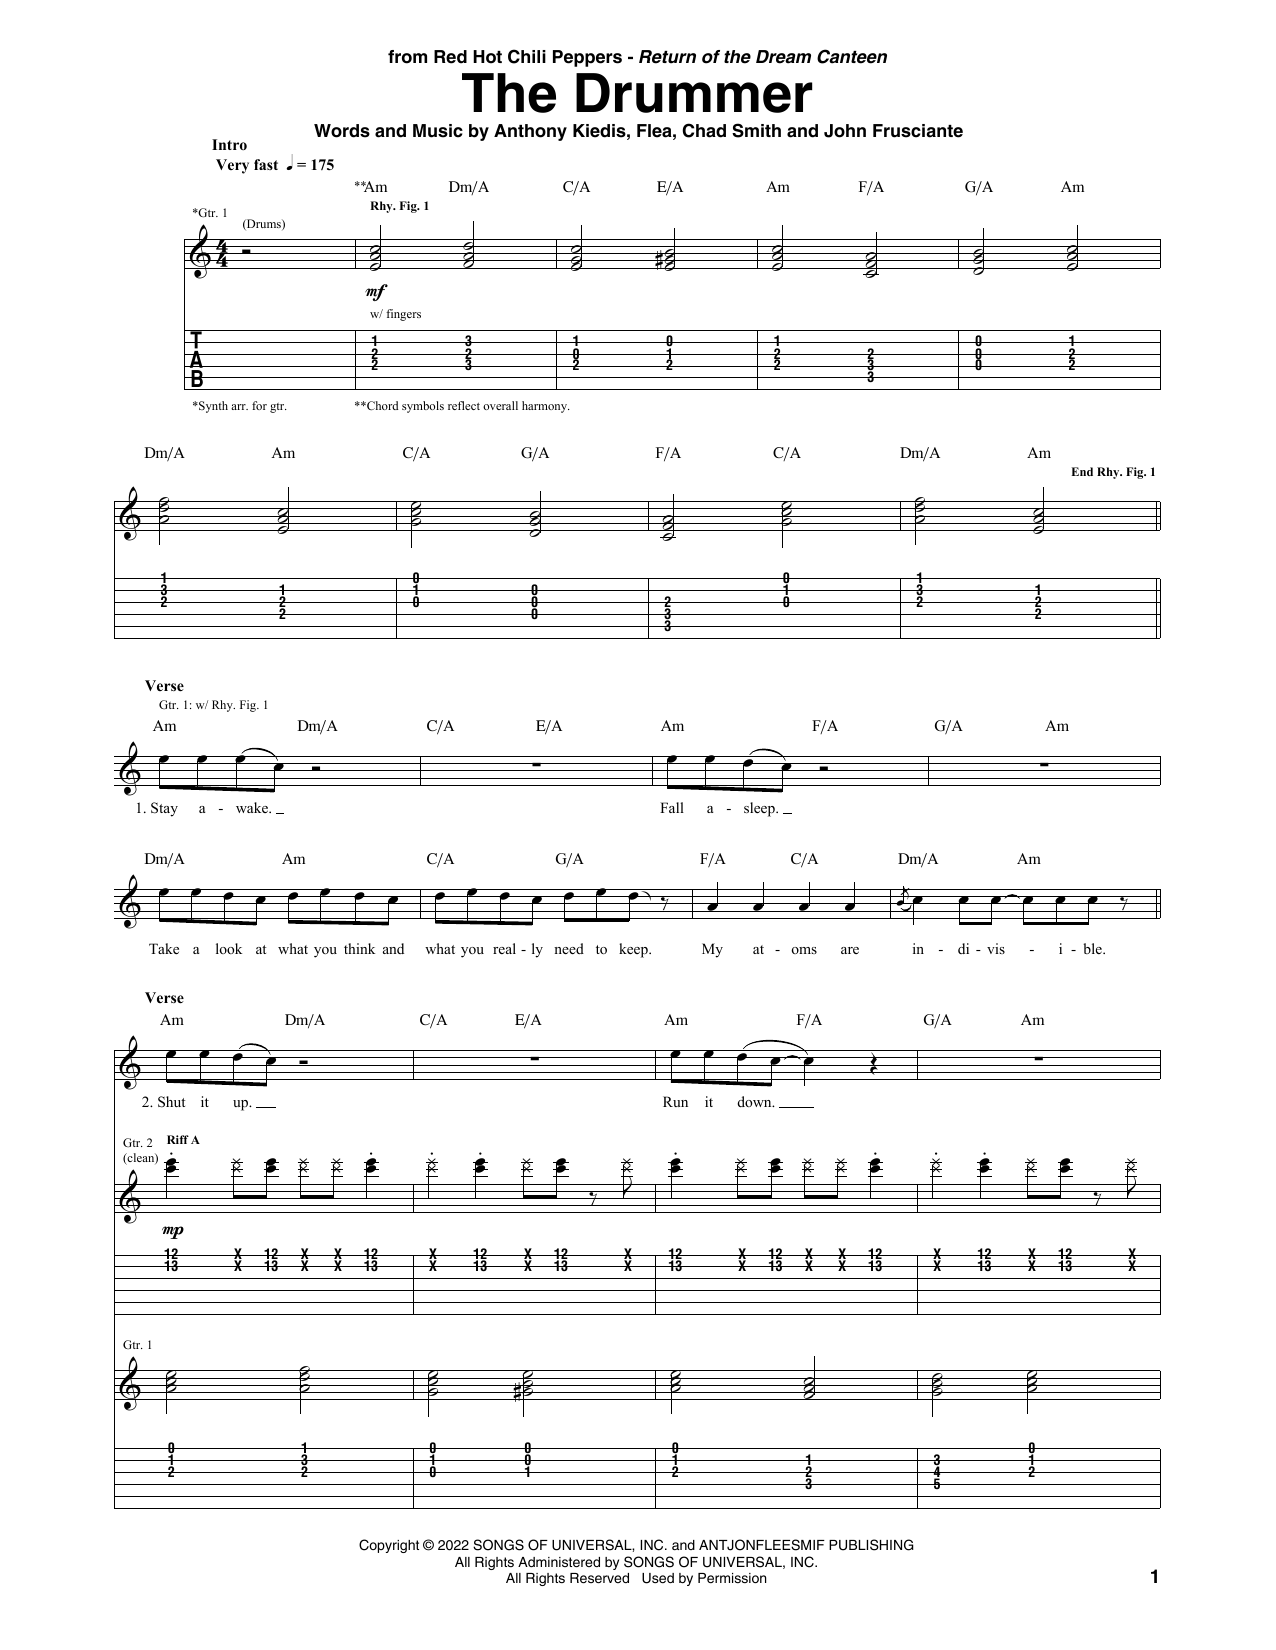 Download Red Hot Chili Peppers The Drummer Sheet Music